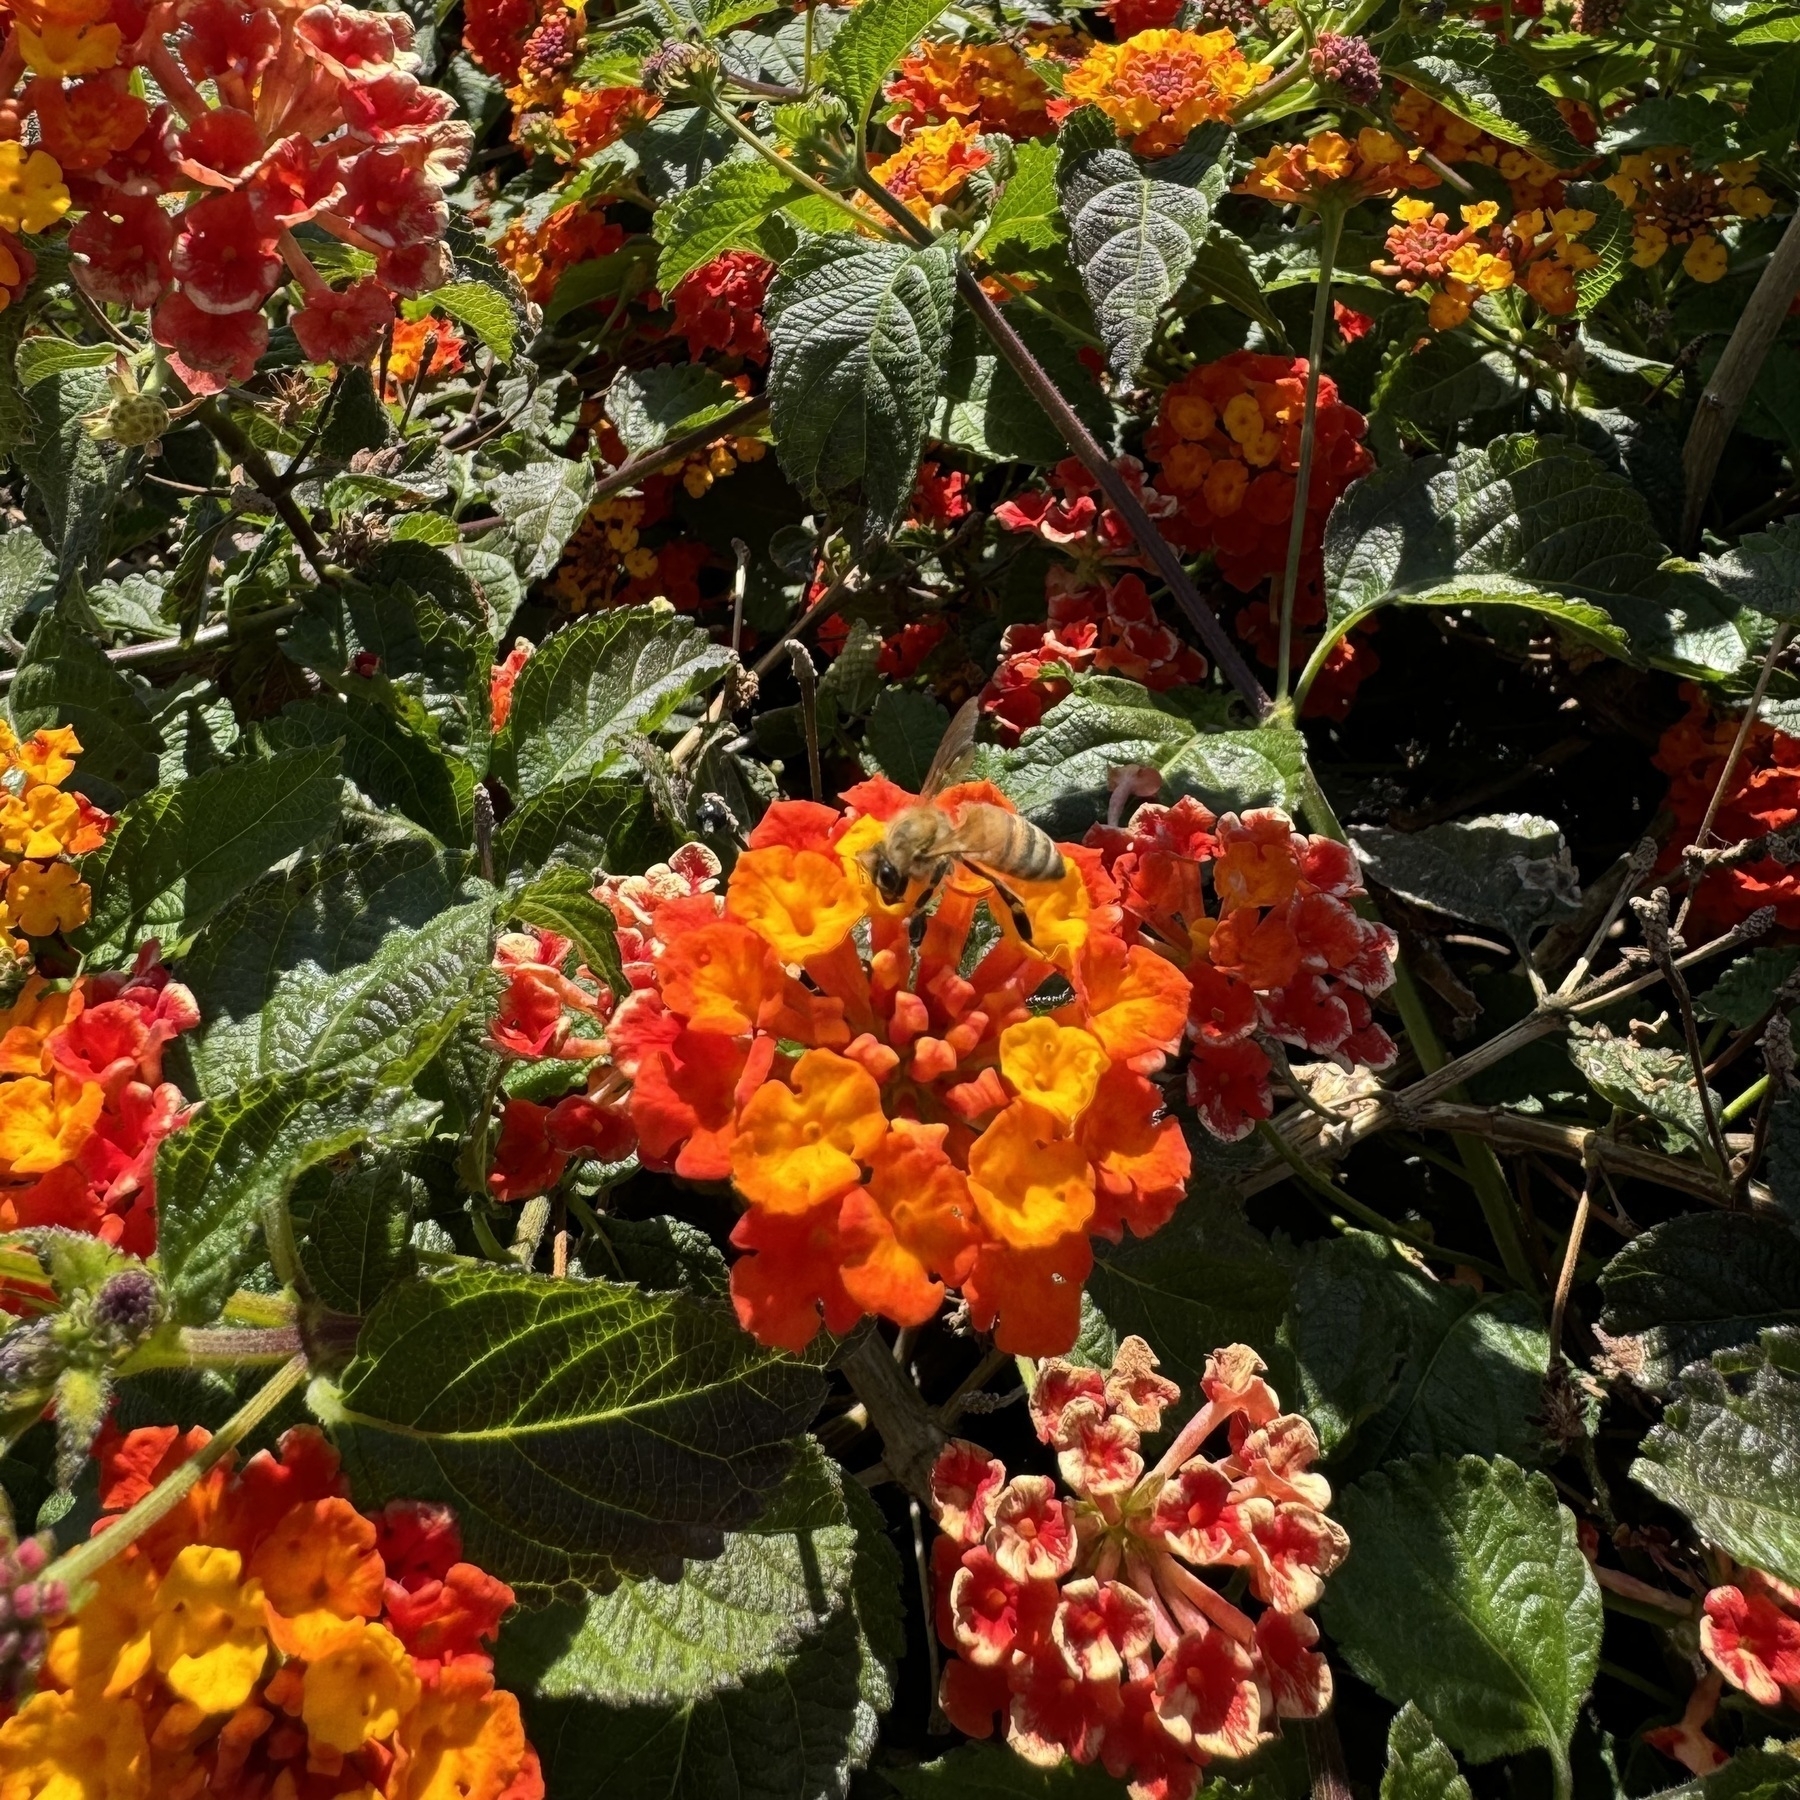 A bee is working its way through a bush covered in bright oranges, red, and yellow flowers.